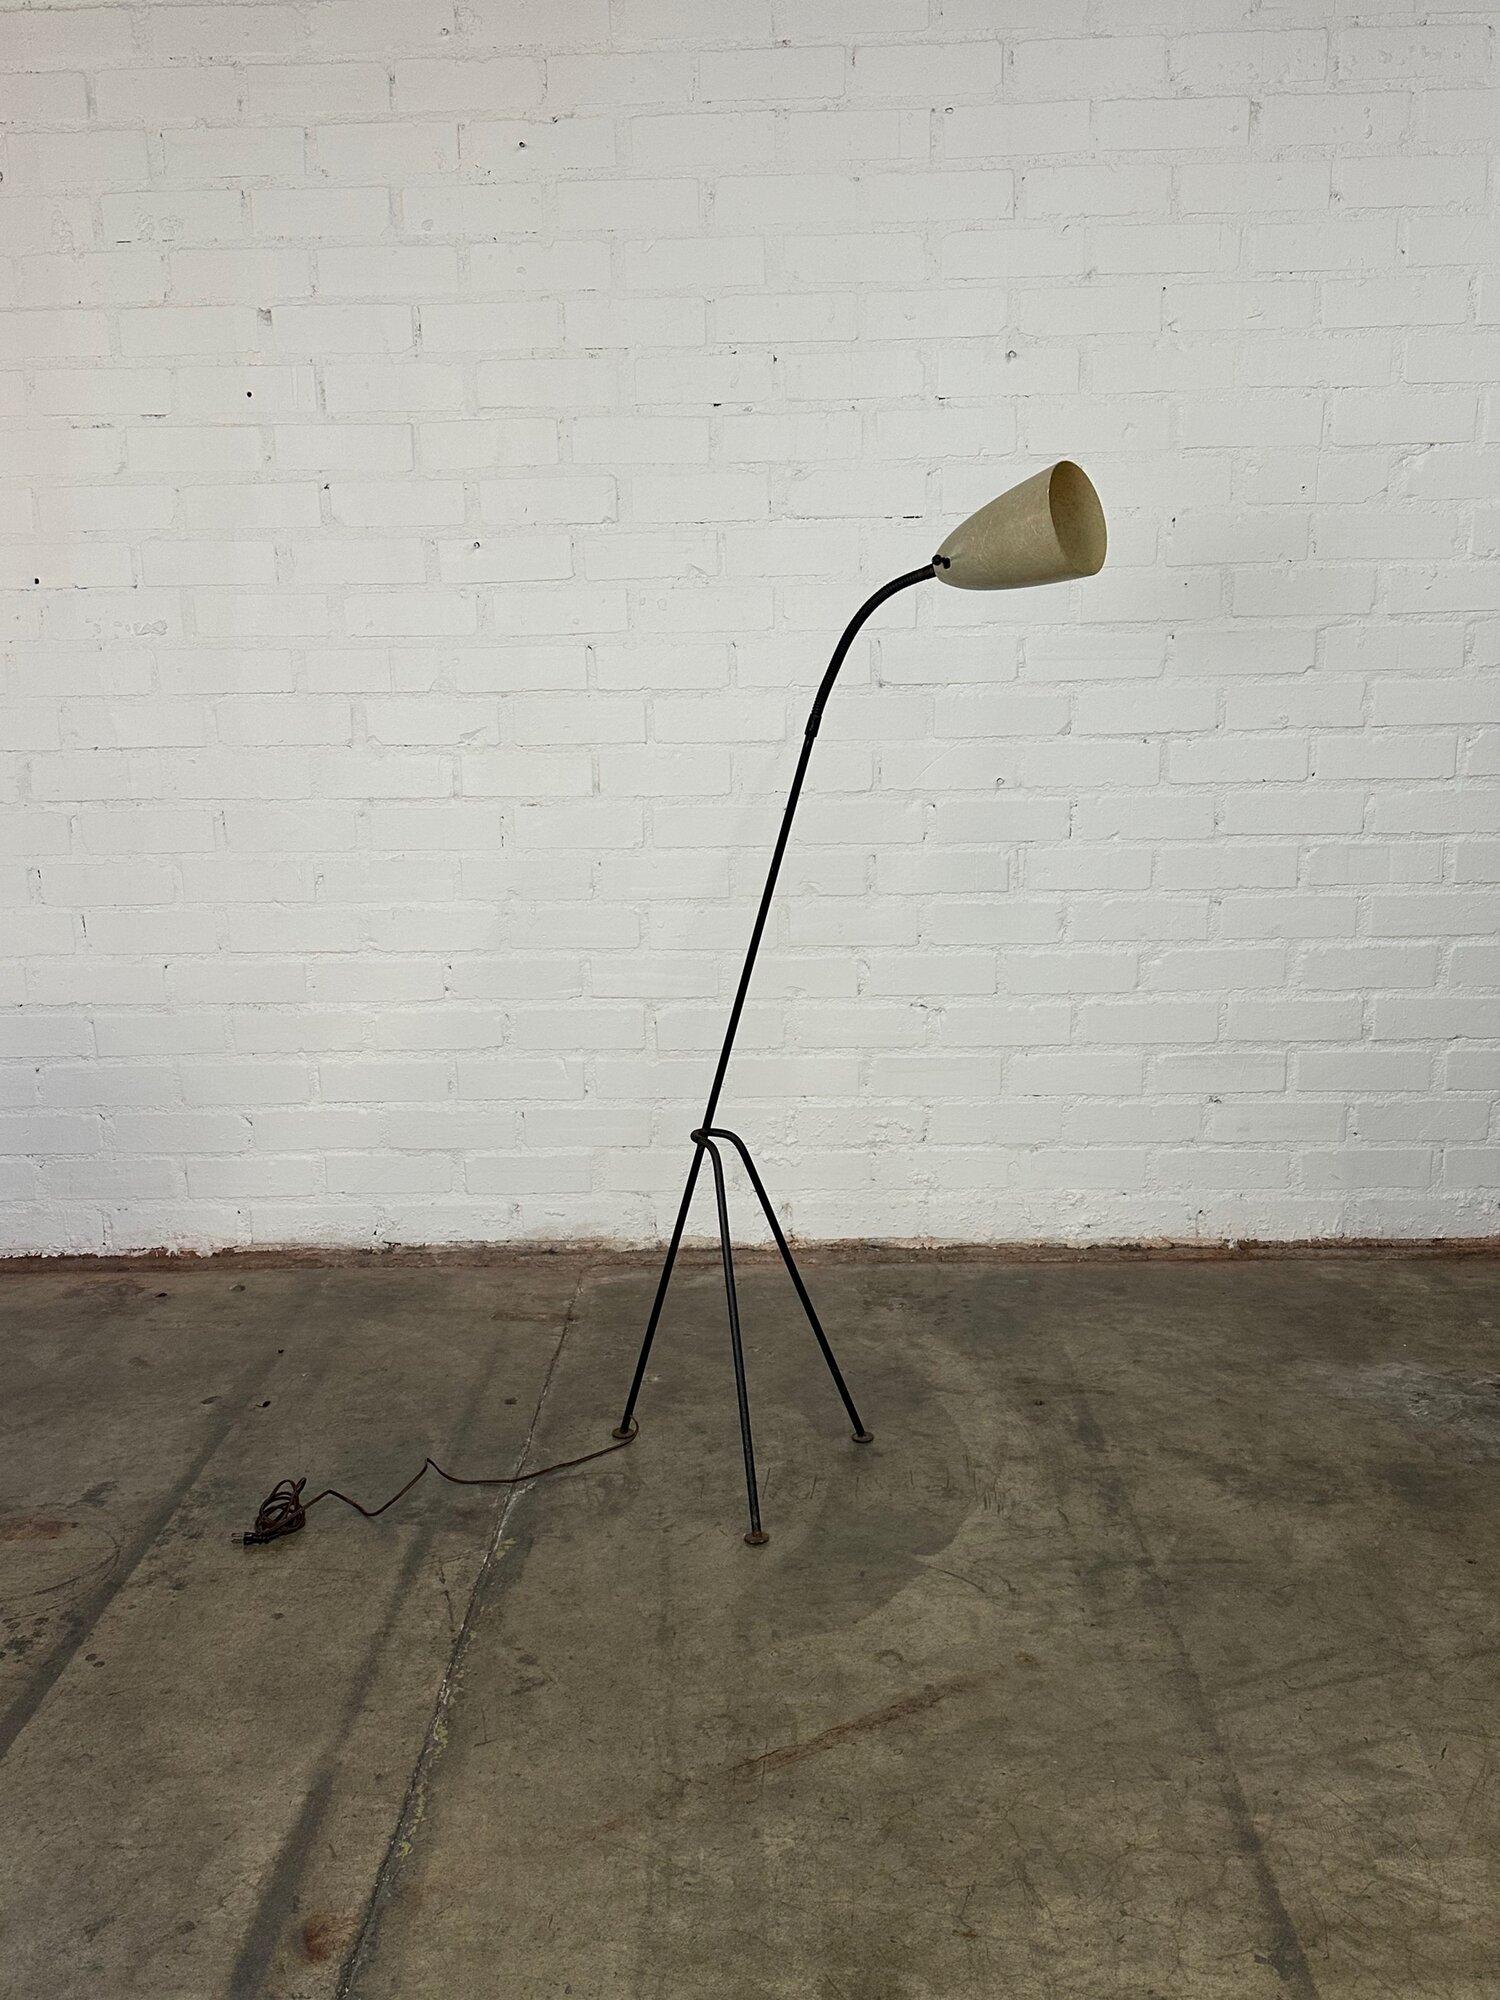 W15 D17 H50

Vintage fully functional grass hopper floor lamp in Iron with a fiberglass shade. Item is structurally sound and has an adjustable neck. Iron base is patinated.